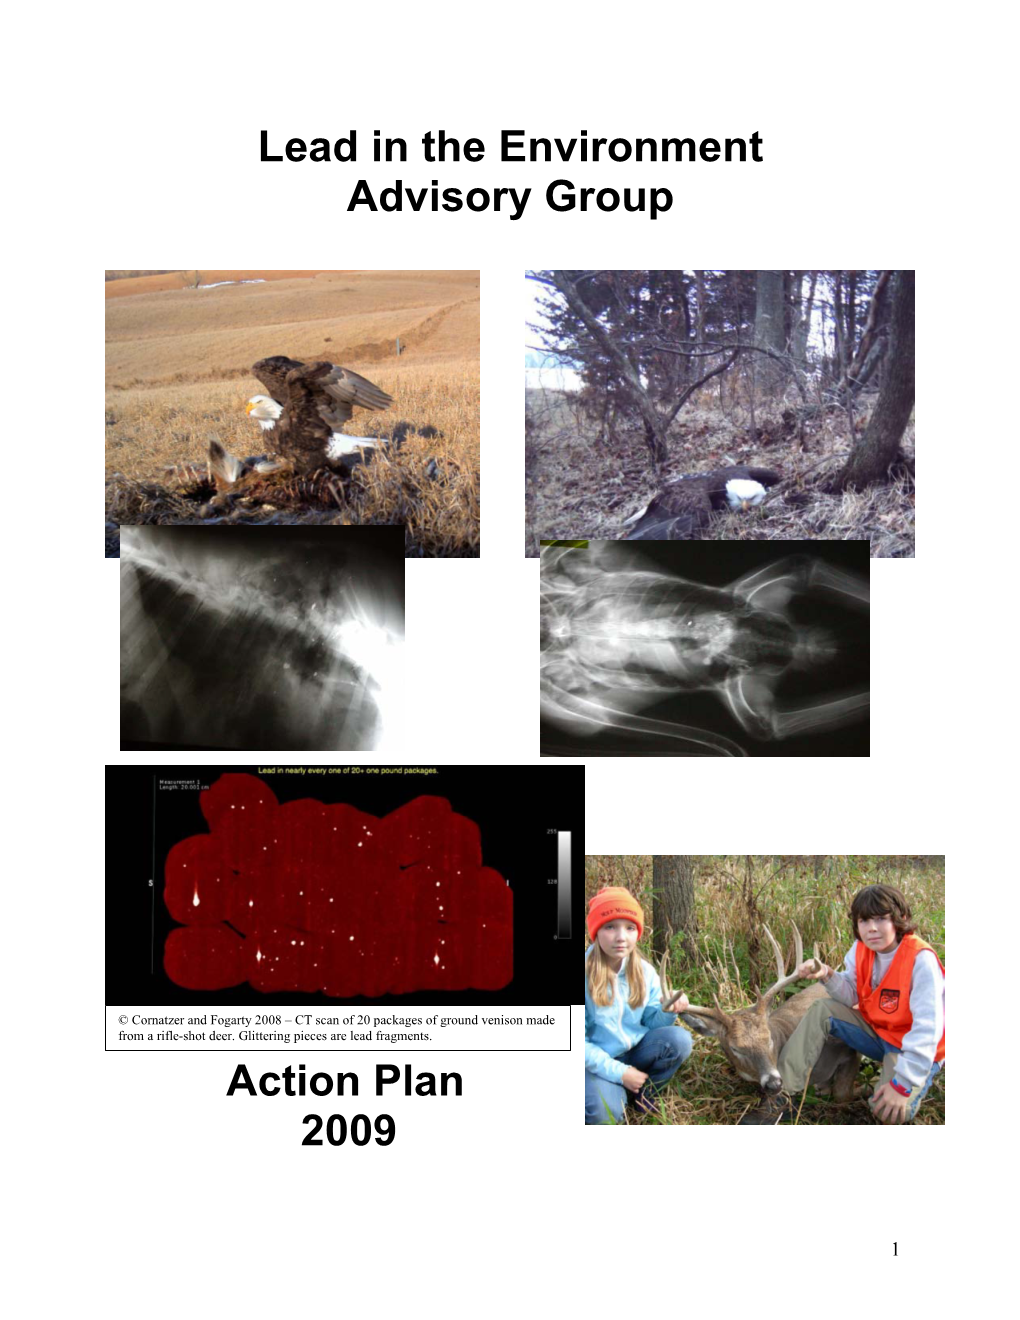 Lead in the Environment Advisory Group Action Plan 2009